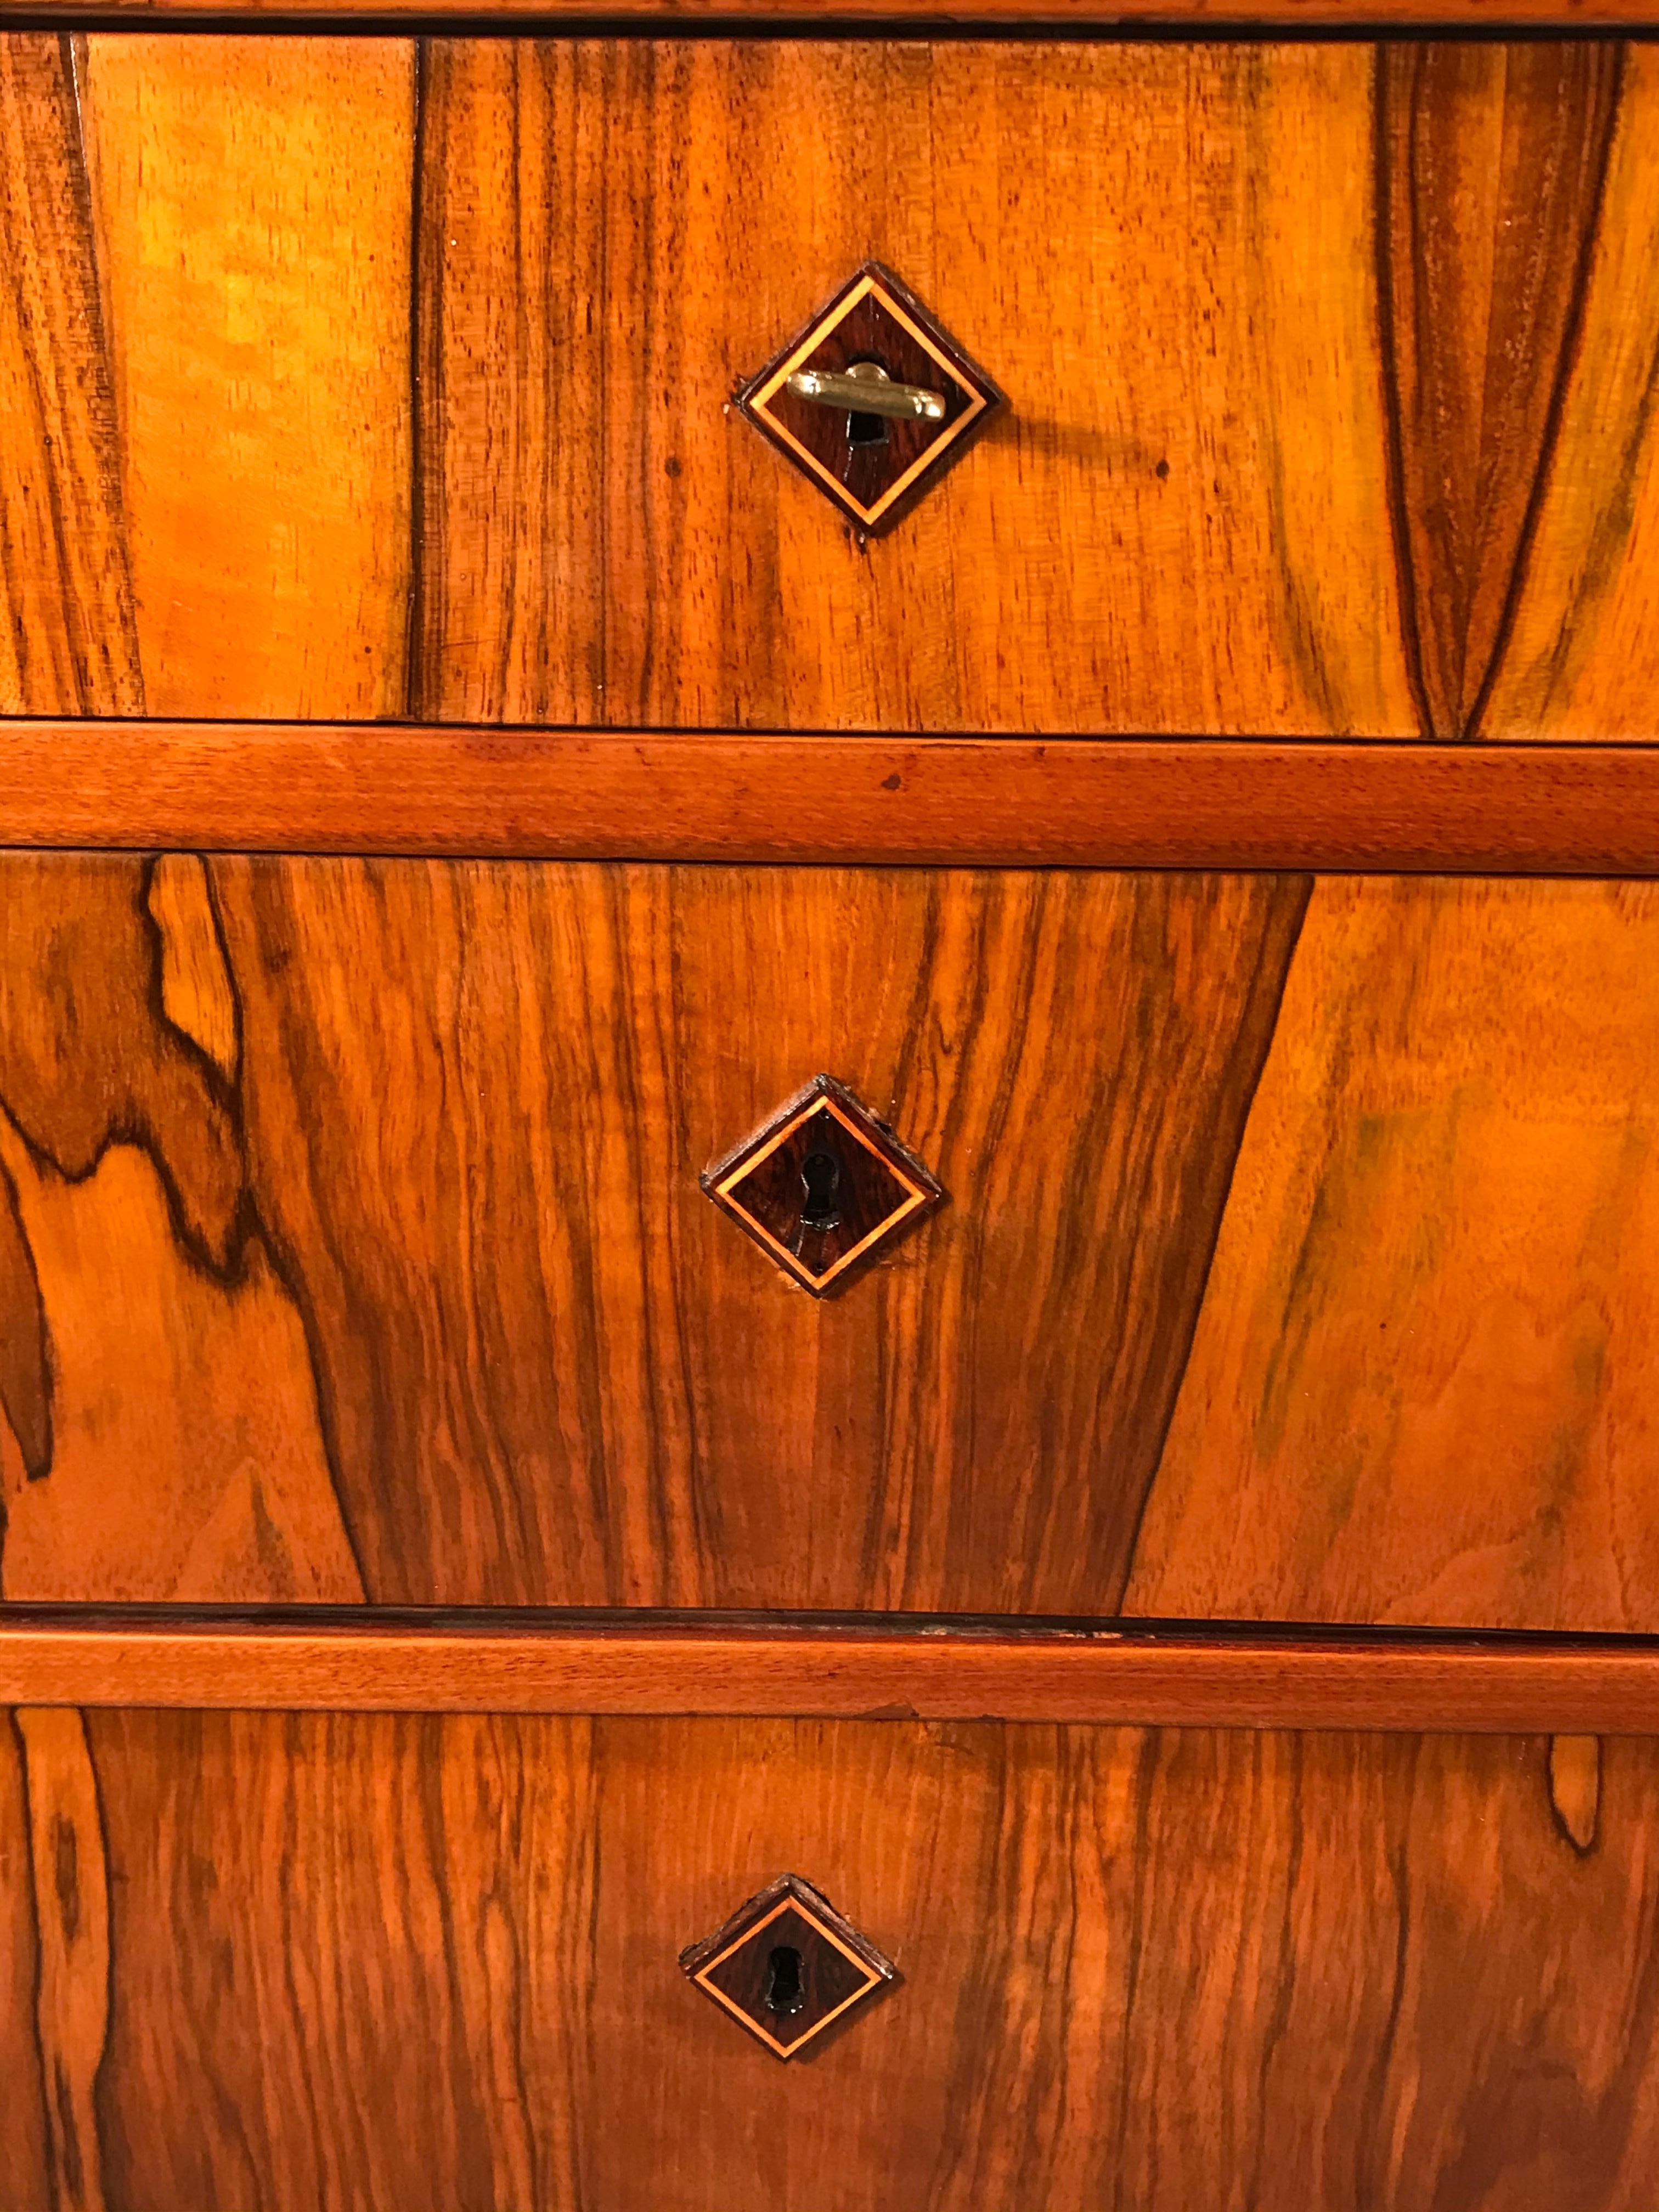 This beautiful three-drawer 1820s Biedermeier dresser’s organic vibrant walnut veneer grain and the sleek design makes this piece the perfect addition for any interior style. The charming wooden escutcheons are original. The chest of drawers is in